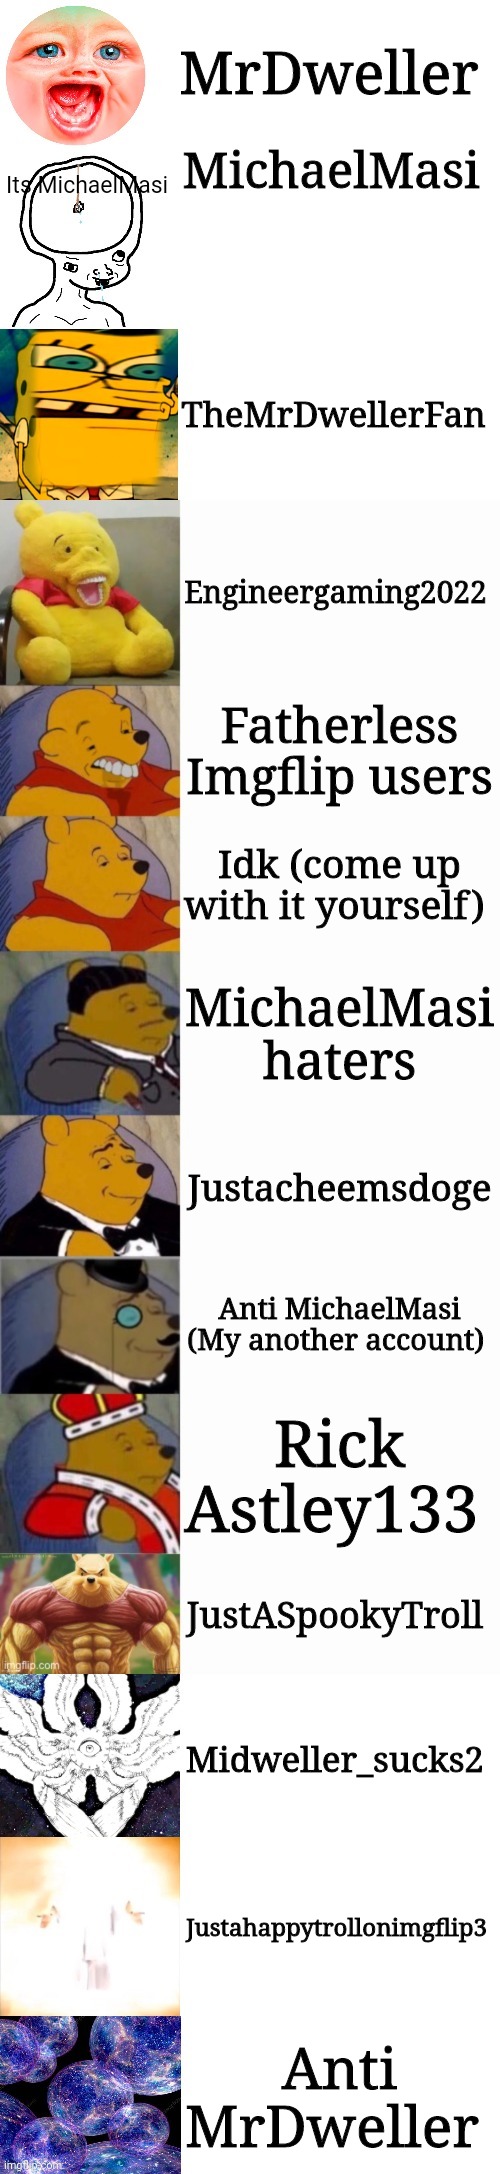 My relations with other Imgflip users 2: | MrDweller; MichaelMasi; TheMrDwellerFan; Engineergaming2022; Fatherless Imgflip users; Idk (come up with it yourself); MichaelMasi haters; Justacheemsdoge; Anti MichaelMasi (My another account); Rick Astley133; JustASpookyTroll; Midweller_sucks2; Justahappytrollonimgflip3; Anti MrDweller | image tagged in tuxedo winnie the pooh super extended,memes,tuxedo winnie the pooh,relationships,imgflip users,imgflip | made w/ Imgflip meme maker